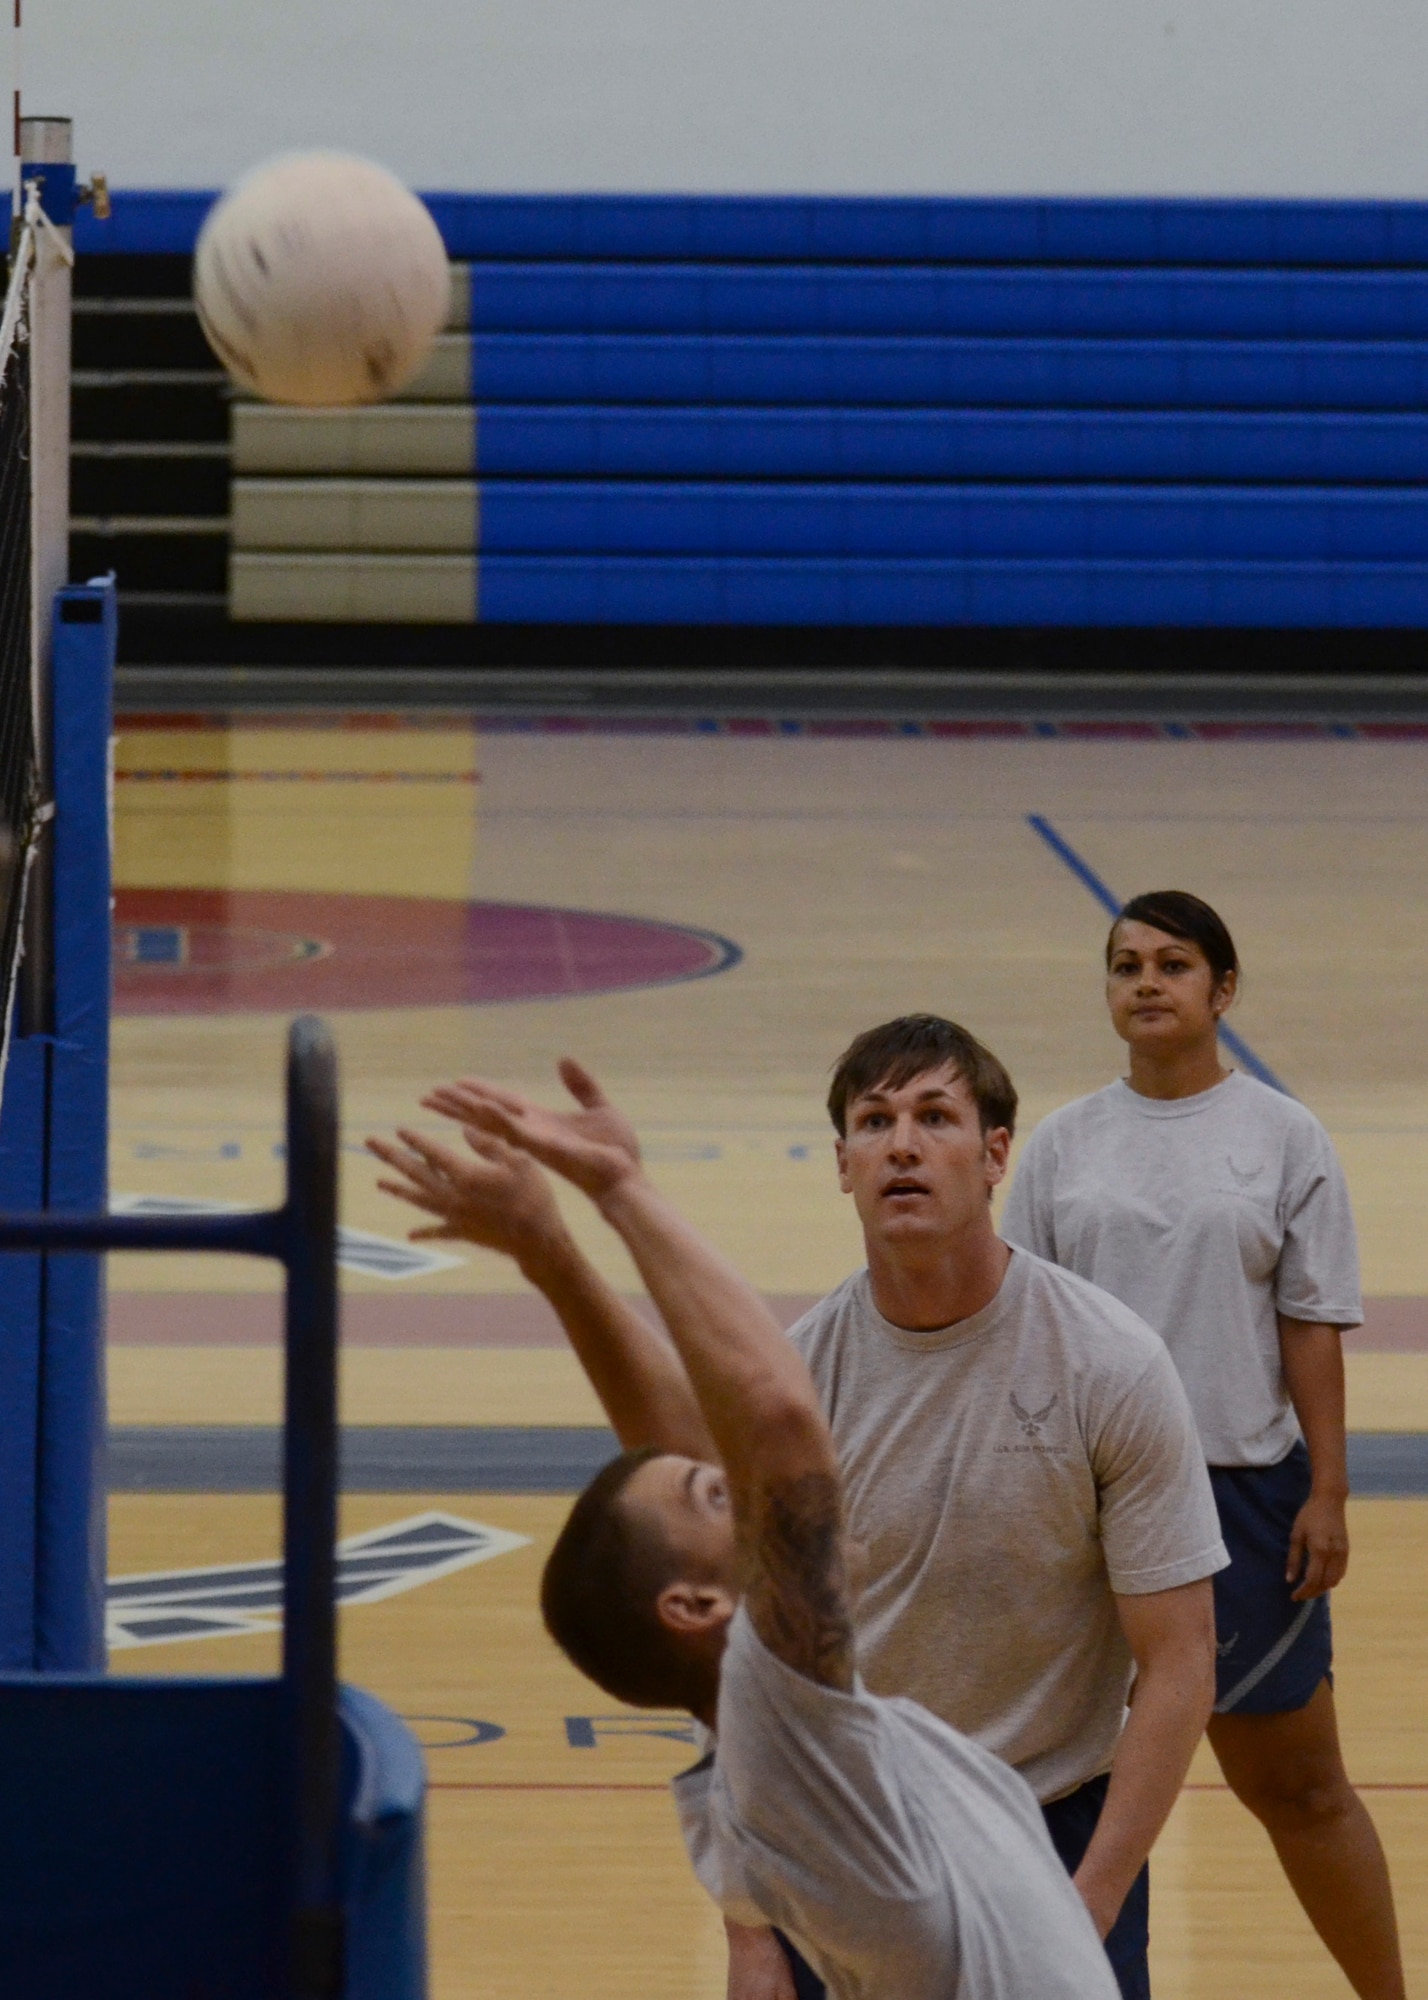 Adam Lloyd, current Airman Leadership School student from the 36th Medical Operations Squadron, sets the volleyball over the net during a game Dec. 2, 2013, at the Coral Reef Fitness Center on Andersen Air Force Base, Guam. The “ALS versus Shirts” volleyball game between the students and first sergeants is an Air Force-wide tradition. The 36th Wing first sergeants defeated the ALS students, 3-1 sets. (U.S. Air Force photo by Senior Airman Marianique Santos/Released)